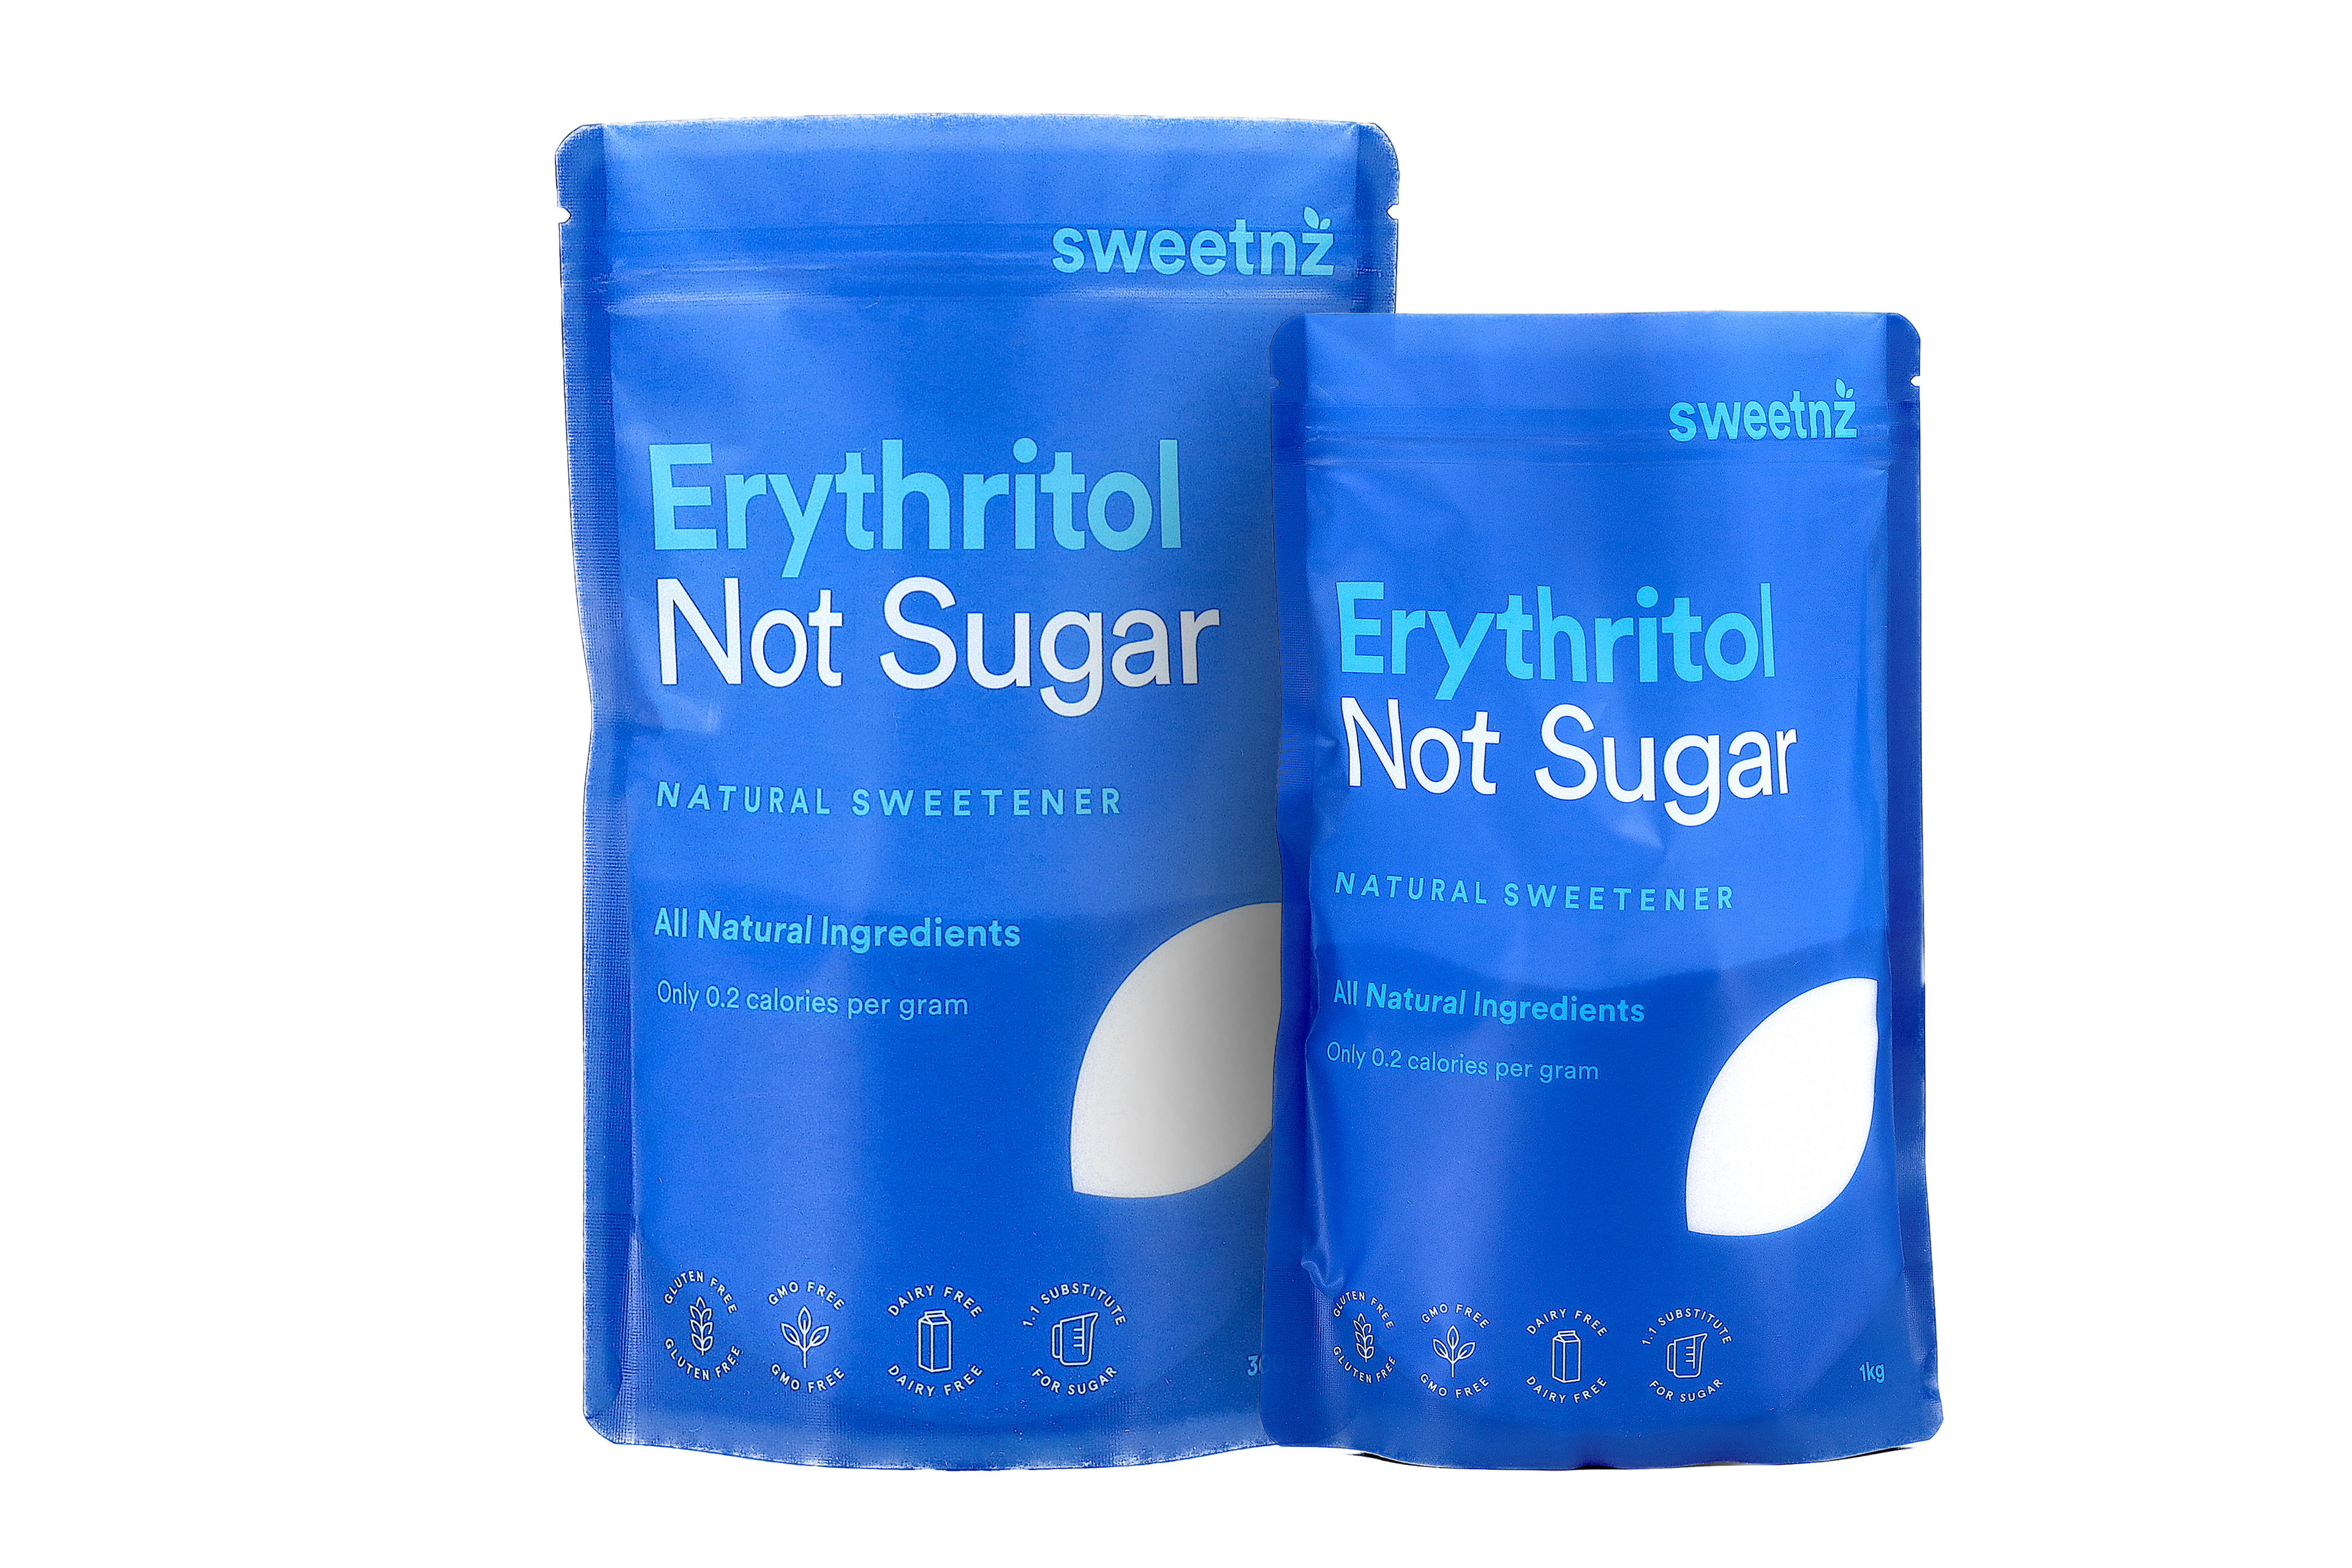 100% Erythritol. 70% the sweetness of table sugar, but without the calories!